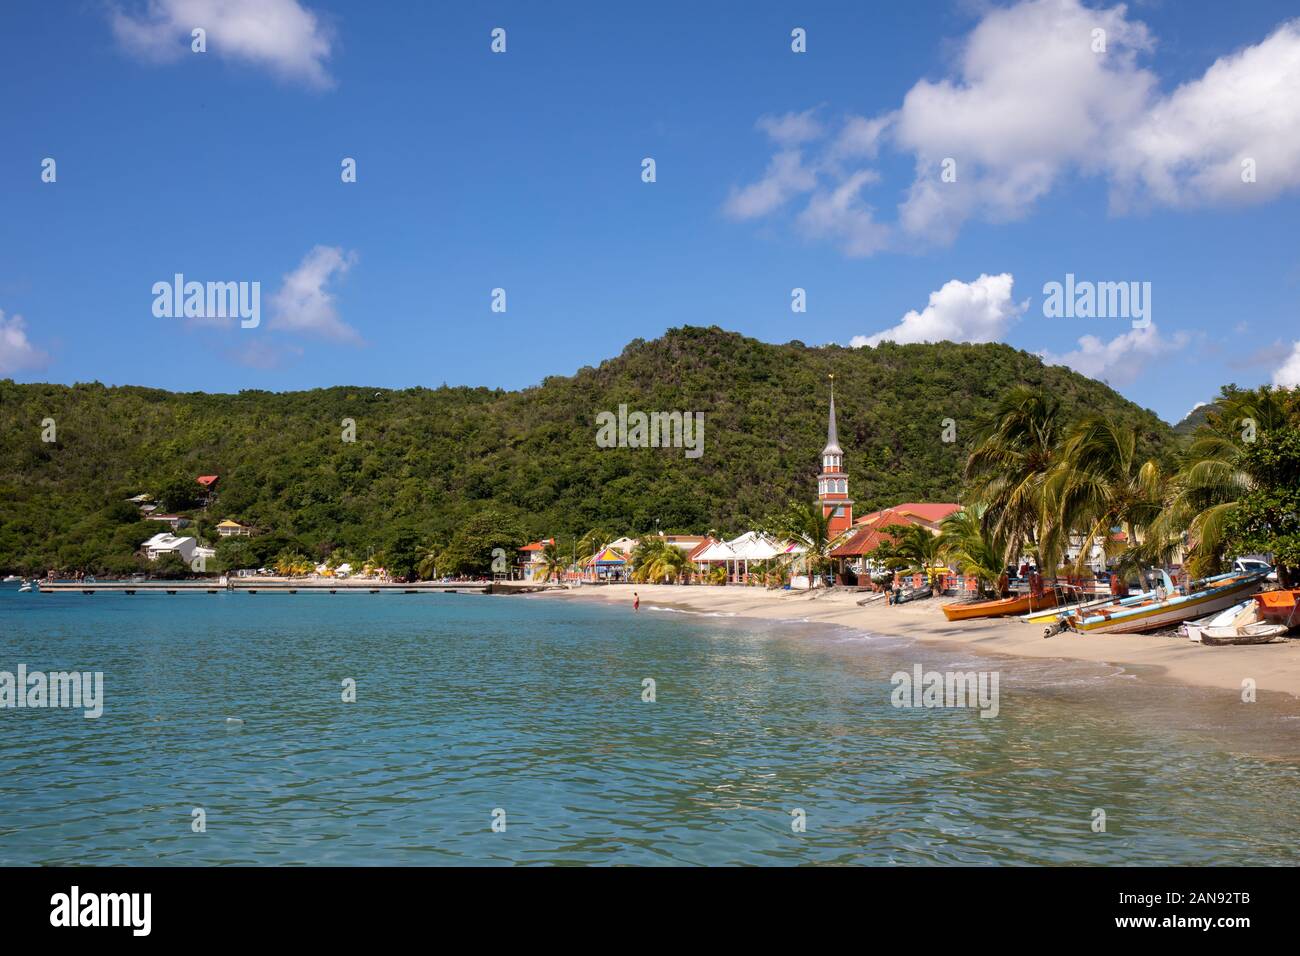 Les Anses d'Arlet, Martinique, FWI - The village on the beach Stock Photo